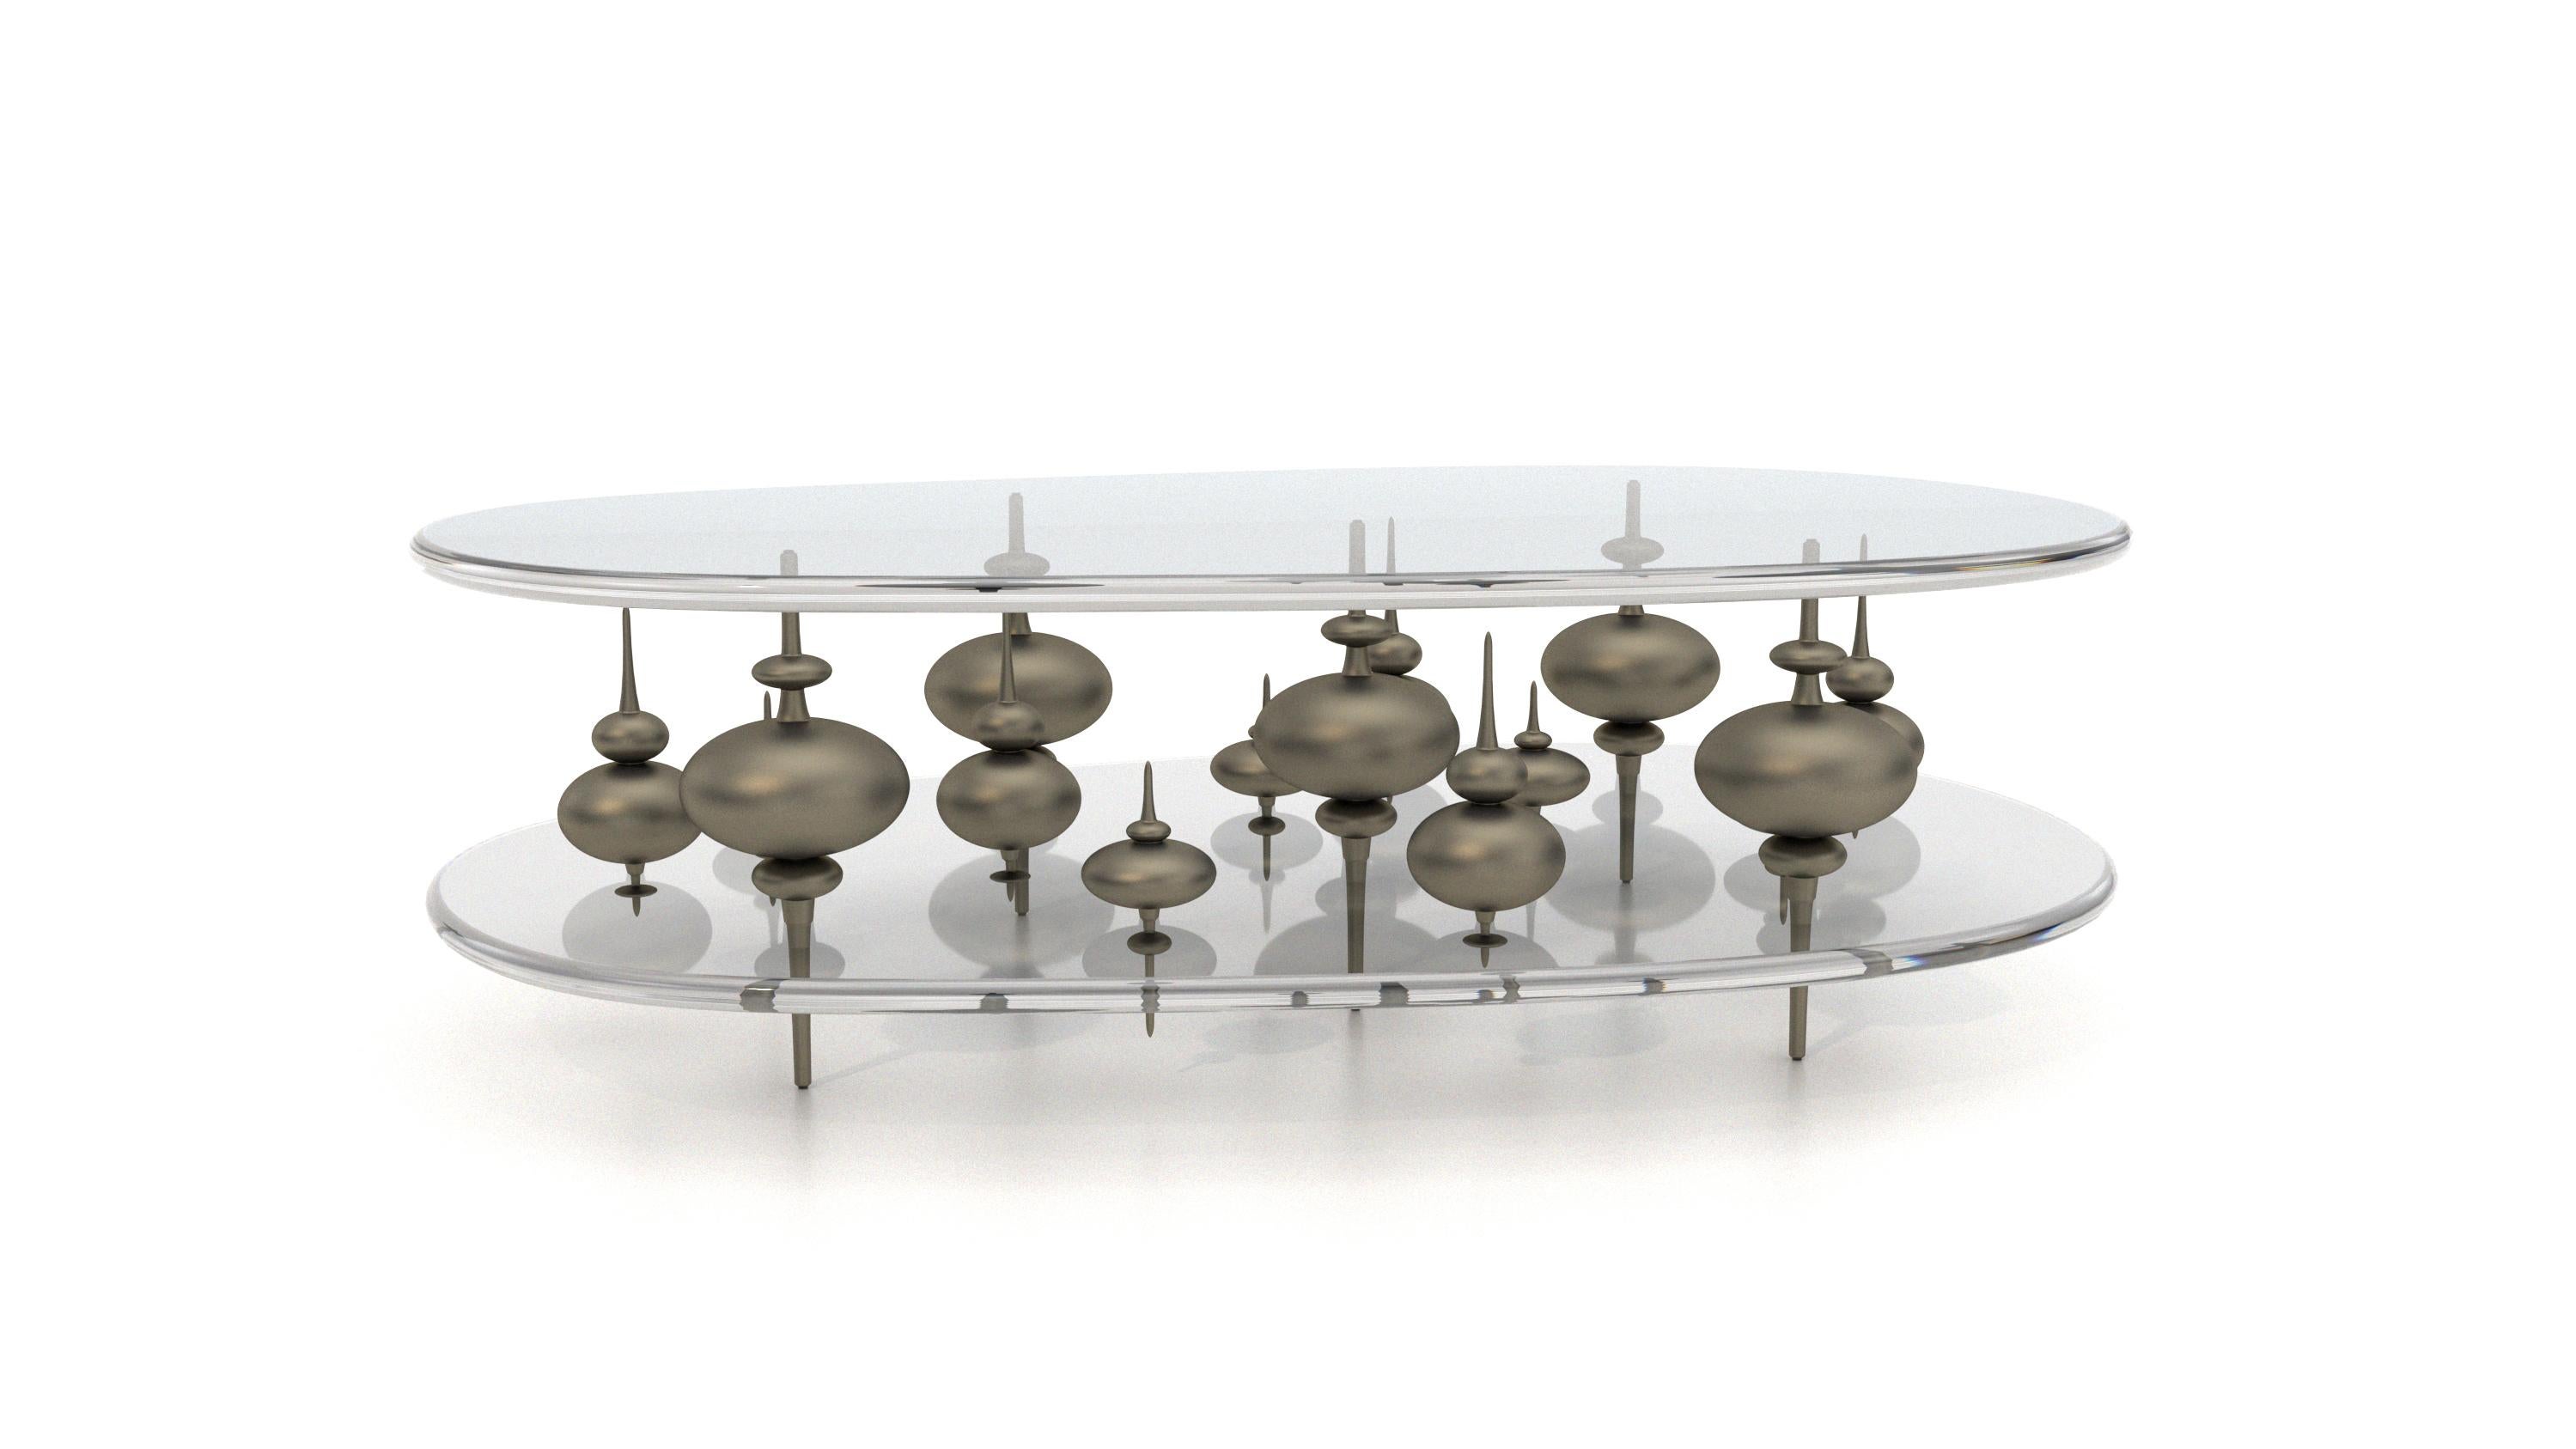 The Minaret cocktail table is inspired by how the rooftop spires pierce through the clouded skyline of Istanbul Turkey. 15 cast bronze elements, hand fabricated at a world renowned foundry in Tucson Arizona, float magically between two crystal clear